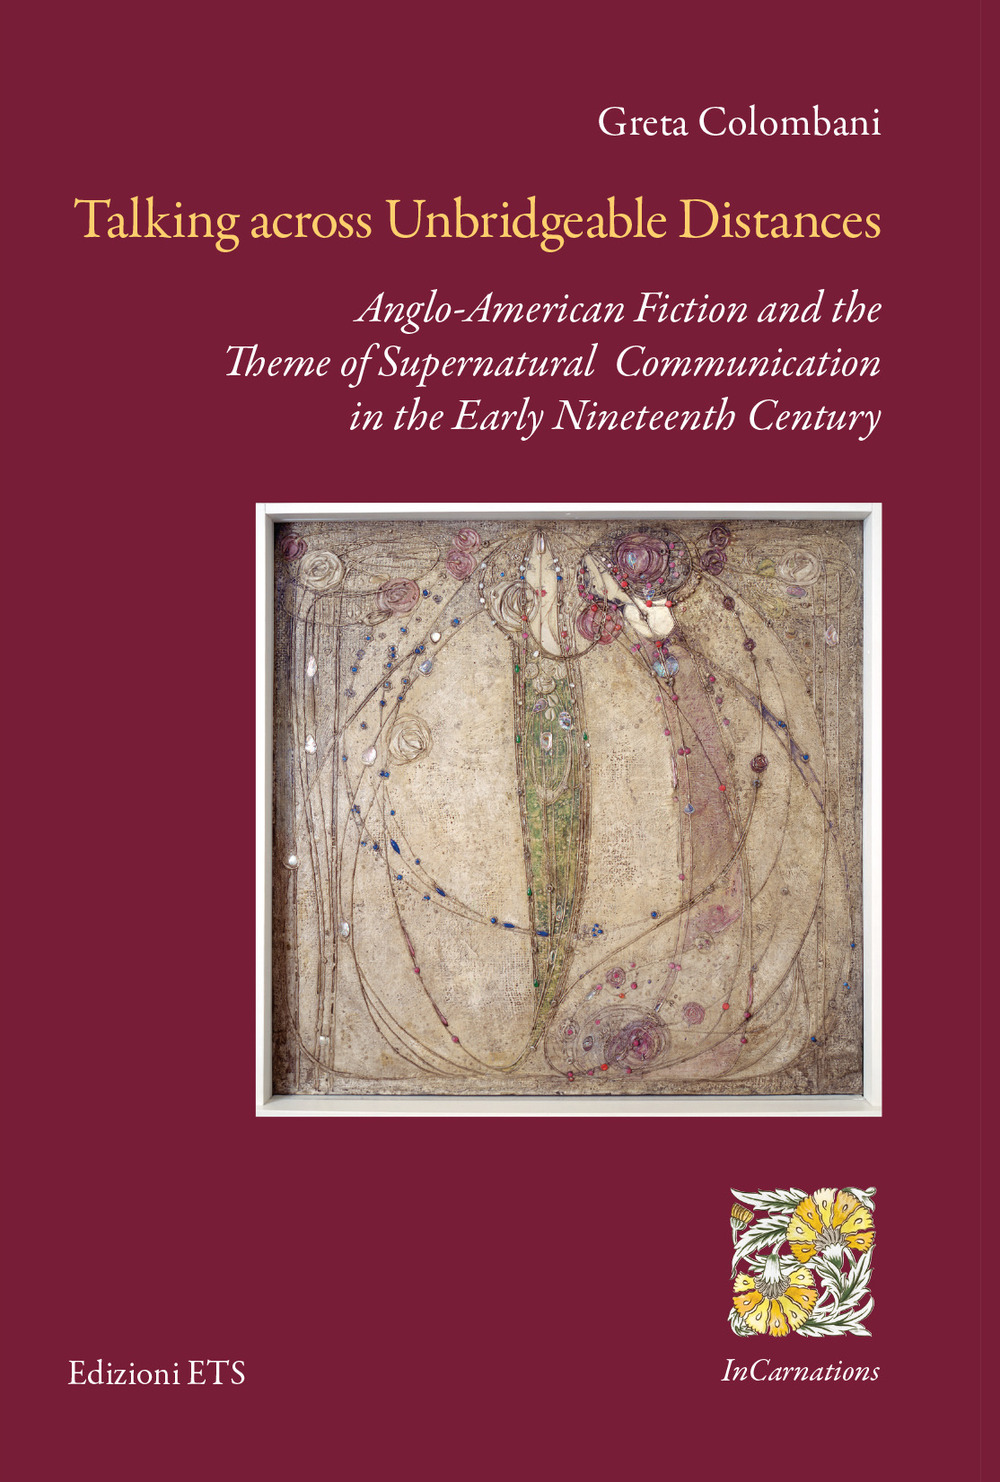 Talking across unbridgeable distances. Anglo-American fiction and the theme of supernatural communication in the early Nineteenth century